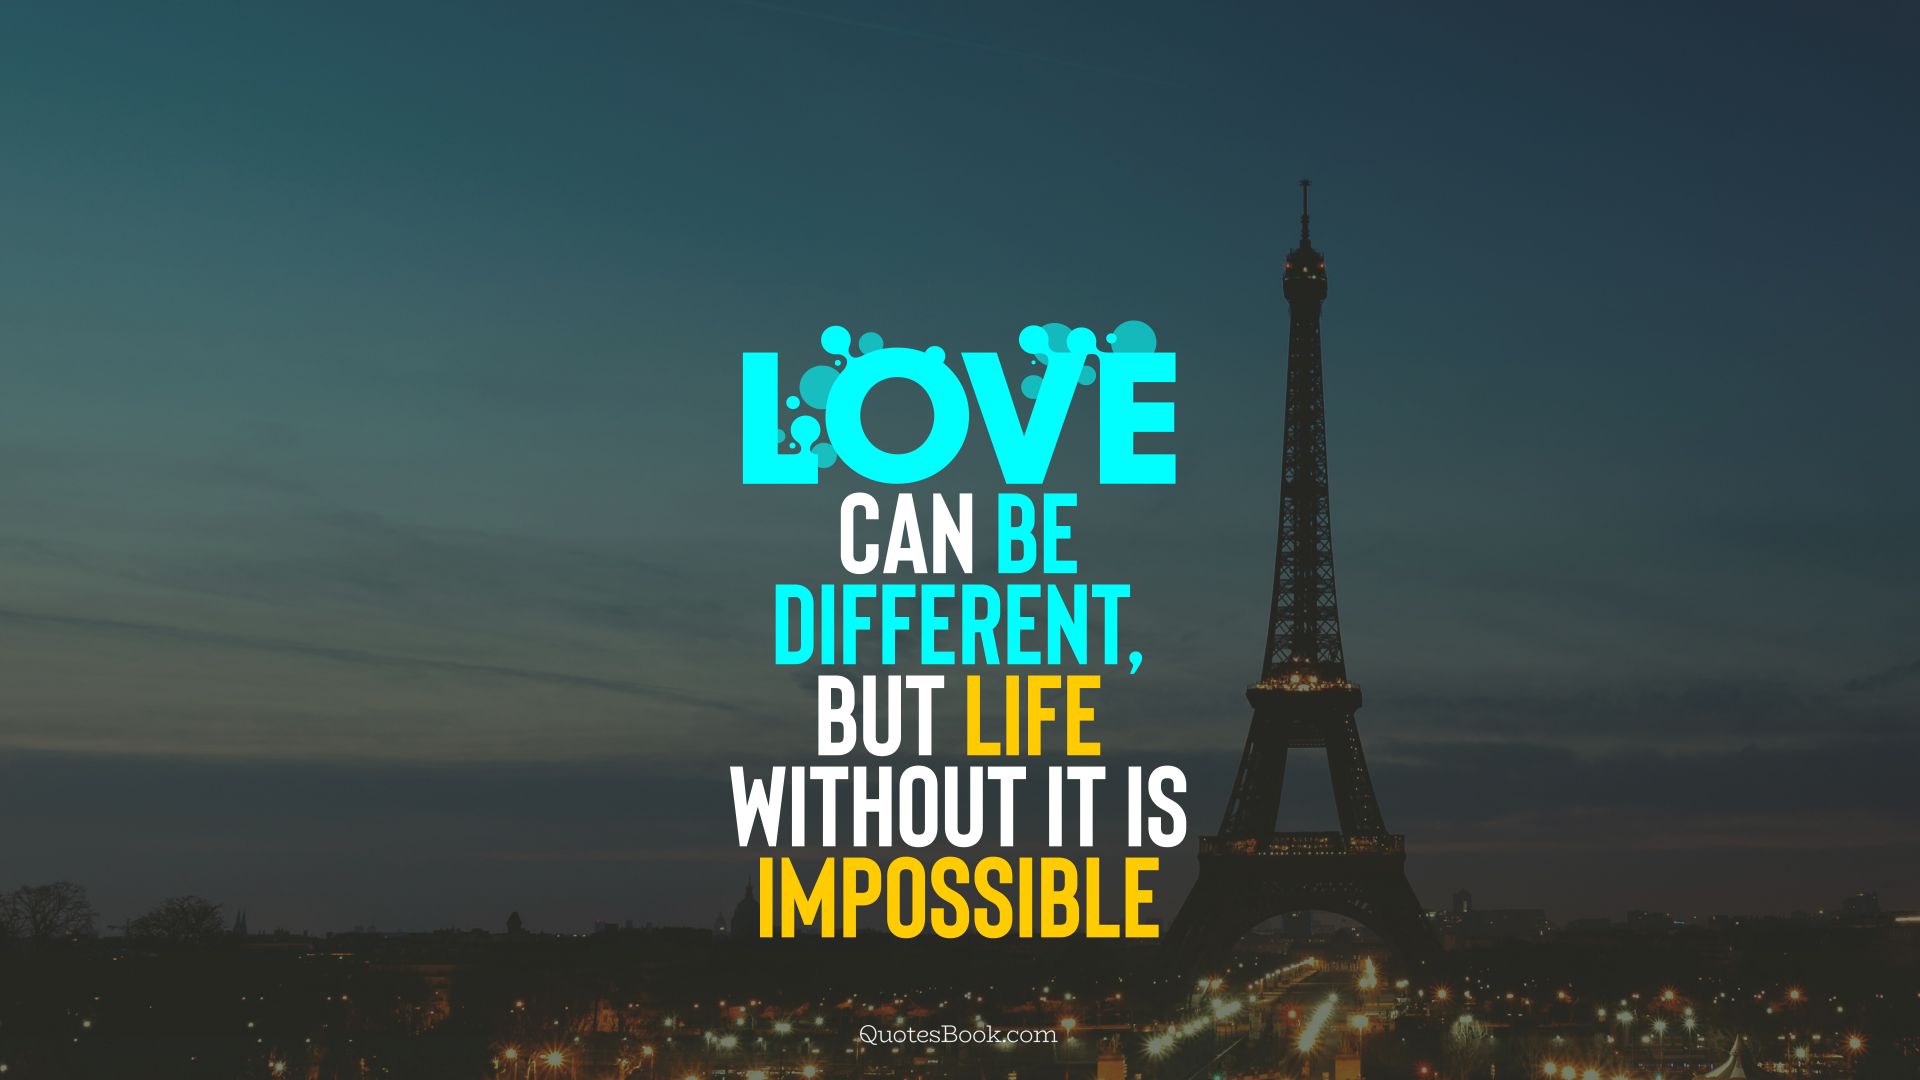 Love can be different, but life without it is impossible. - Quote by QuotesBook